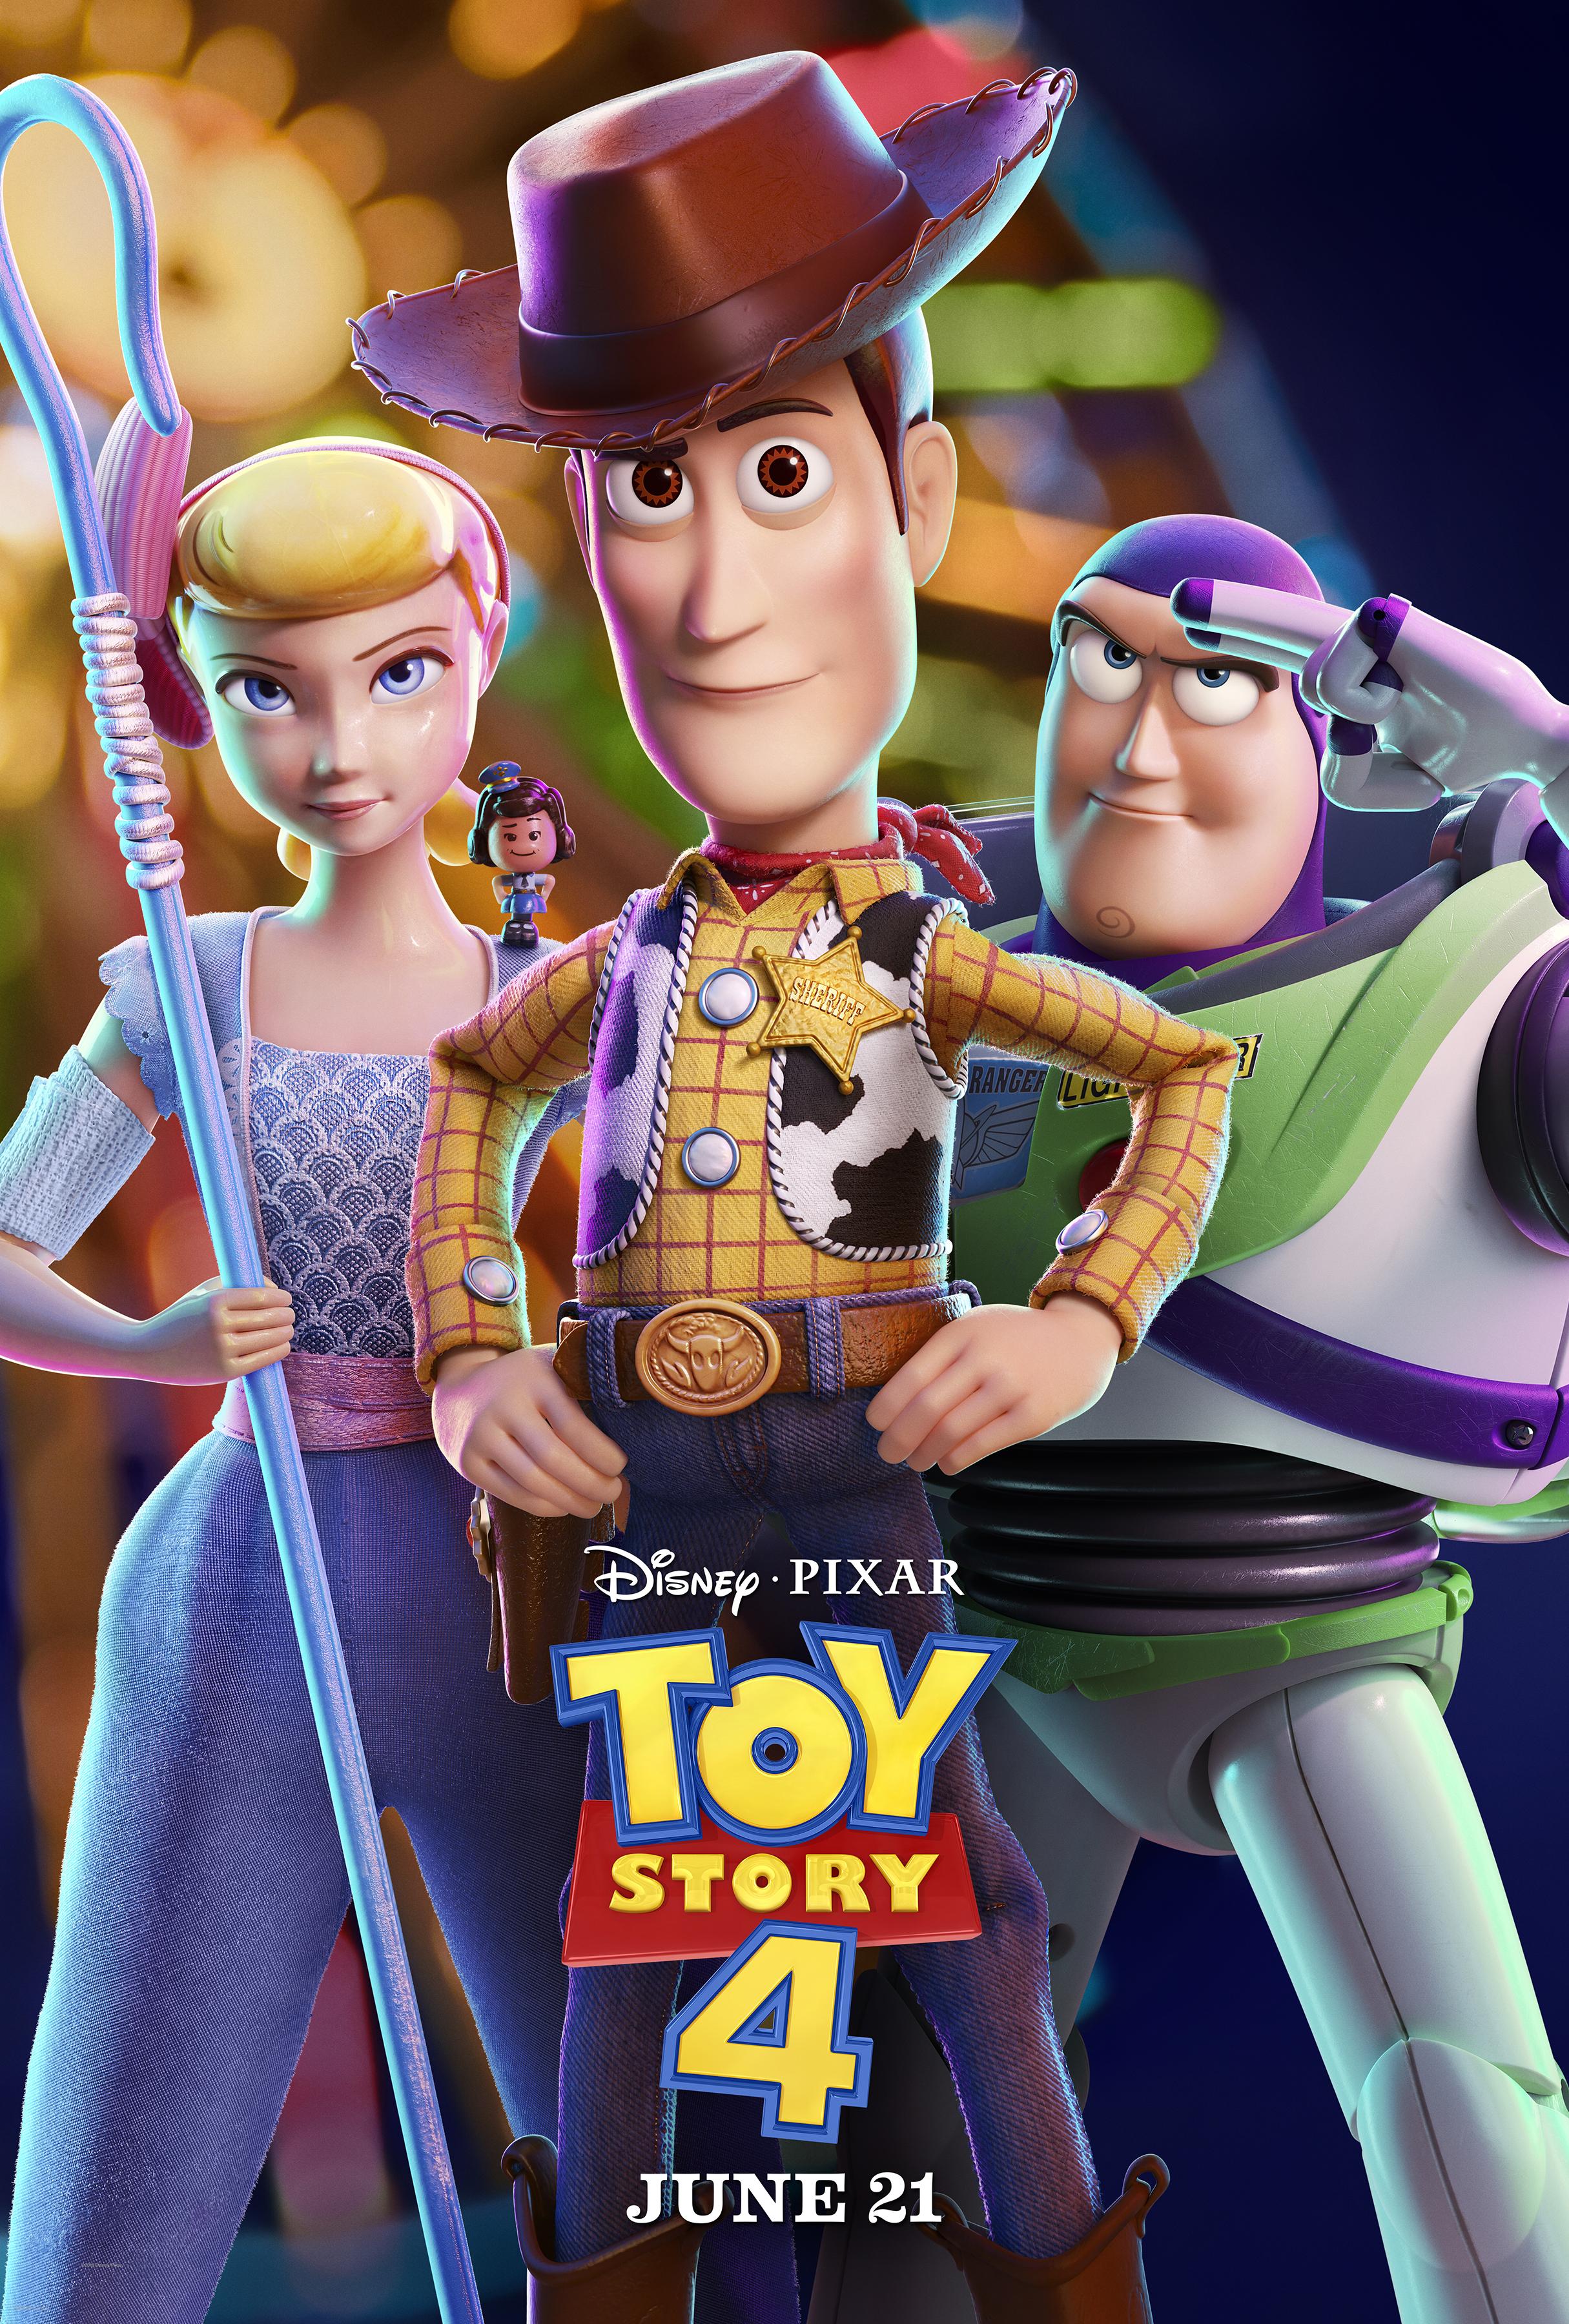 New Toy Story 4 Preview and Final Poster Released!